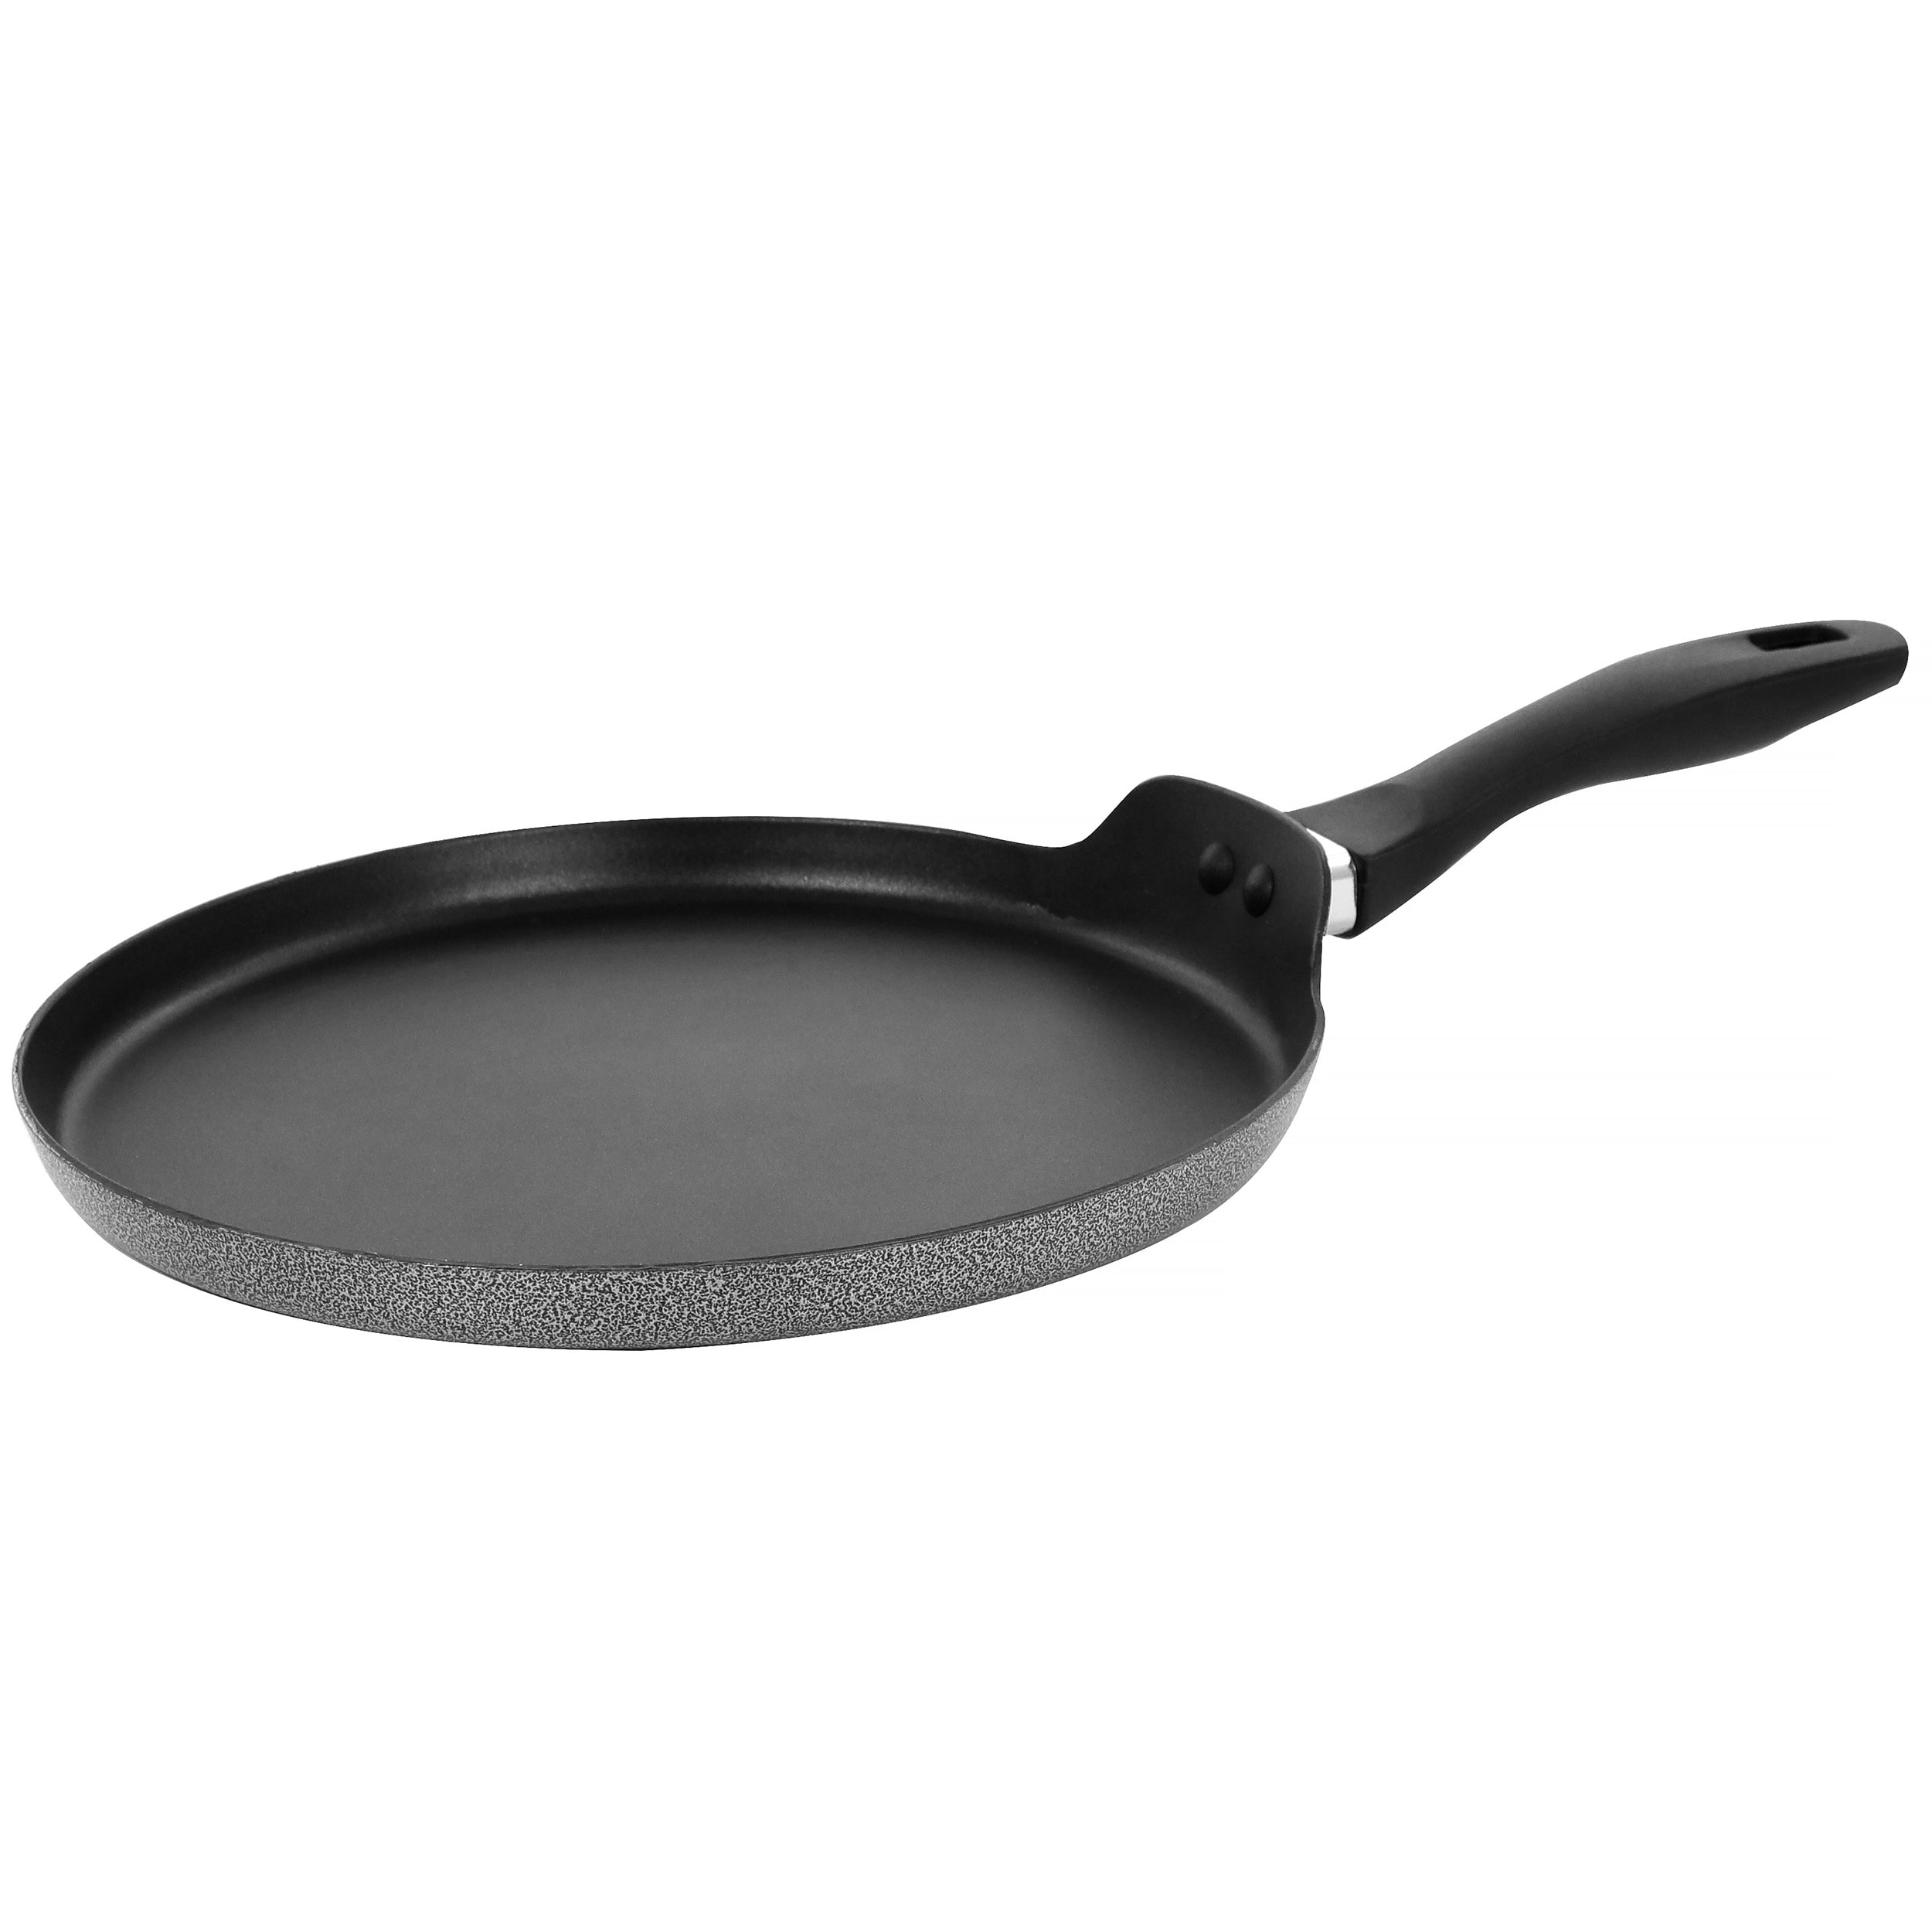 https://ak1.ostkcdn.com/images/products/is/images/direct/bf4b7026ad2edbfdfbe468830b58a3e476be3cc5/Oster-11-Inch-Nonstick-Aluminum-Pancake-Pan.jpg